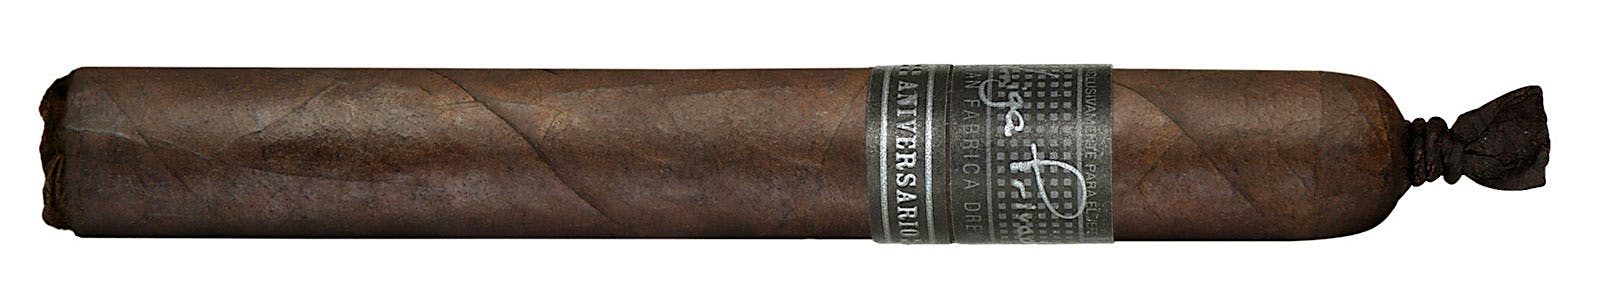 Liga Privada 10-Year Aniversario wears a dark criollo wrapper from Connecticut over a Mexican San Andrés binder and filler from Nicaragua and Honduras.